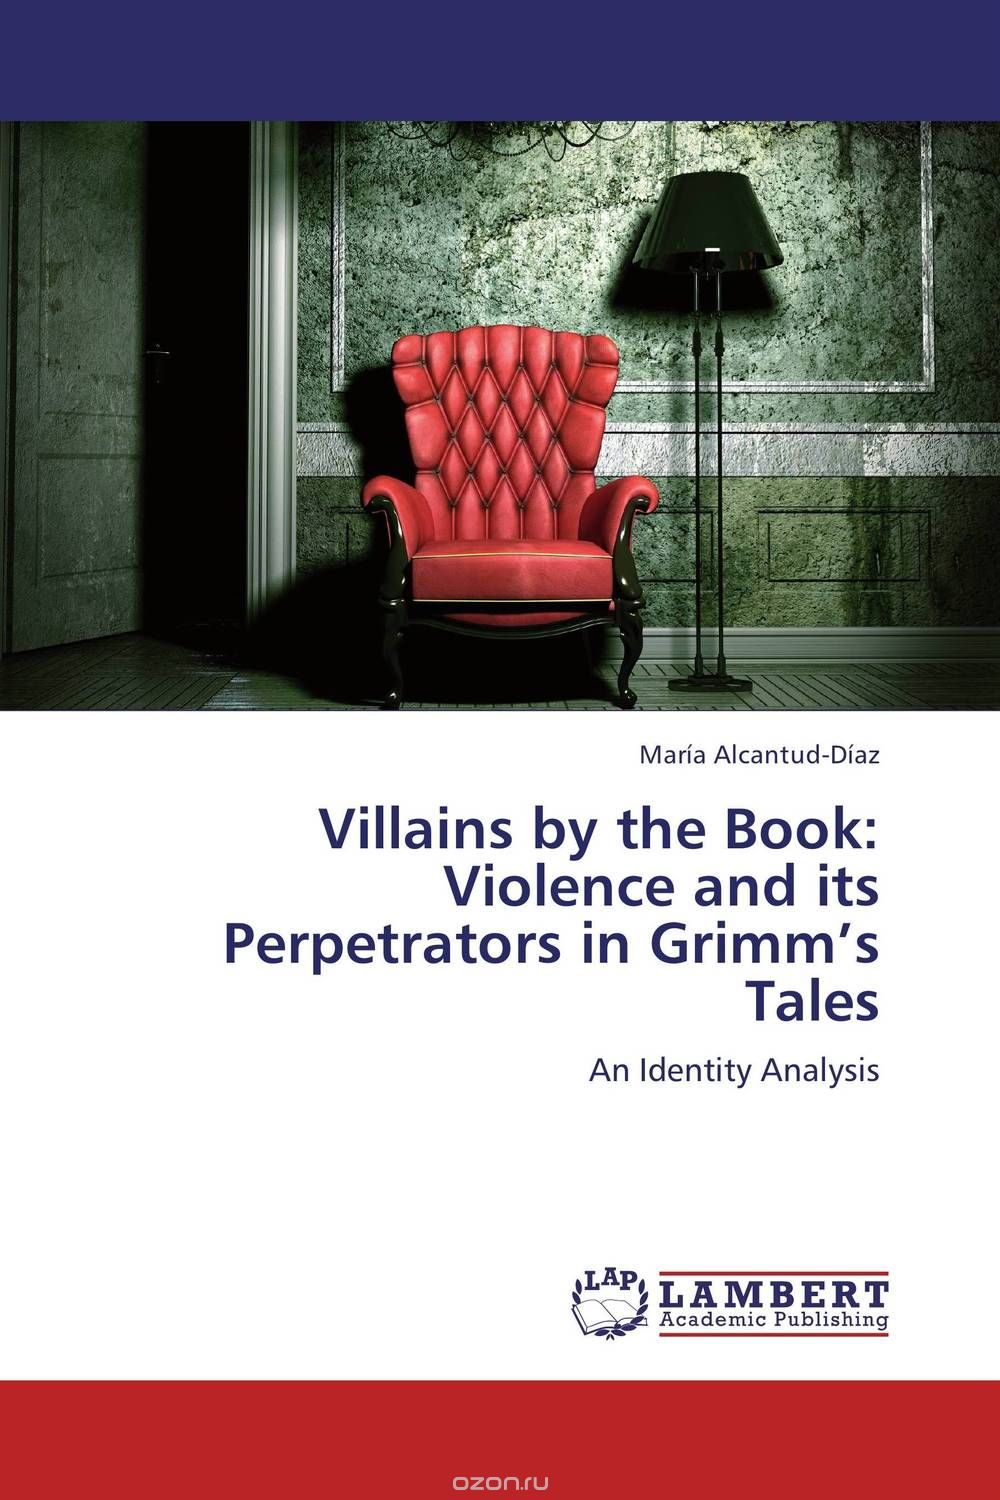 Villains by the Book: Violence and its Perpetrators in Grimm’s Tales